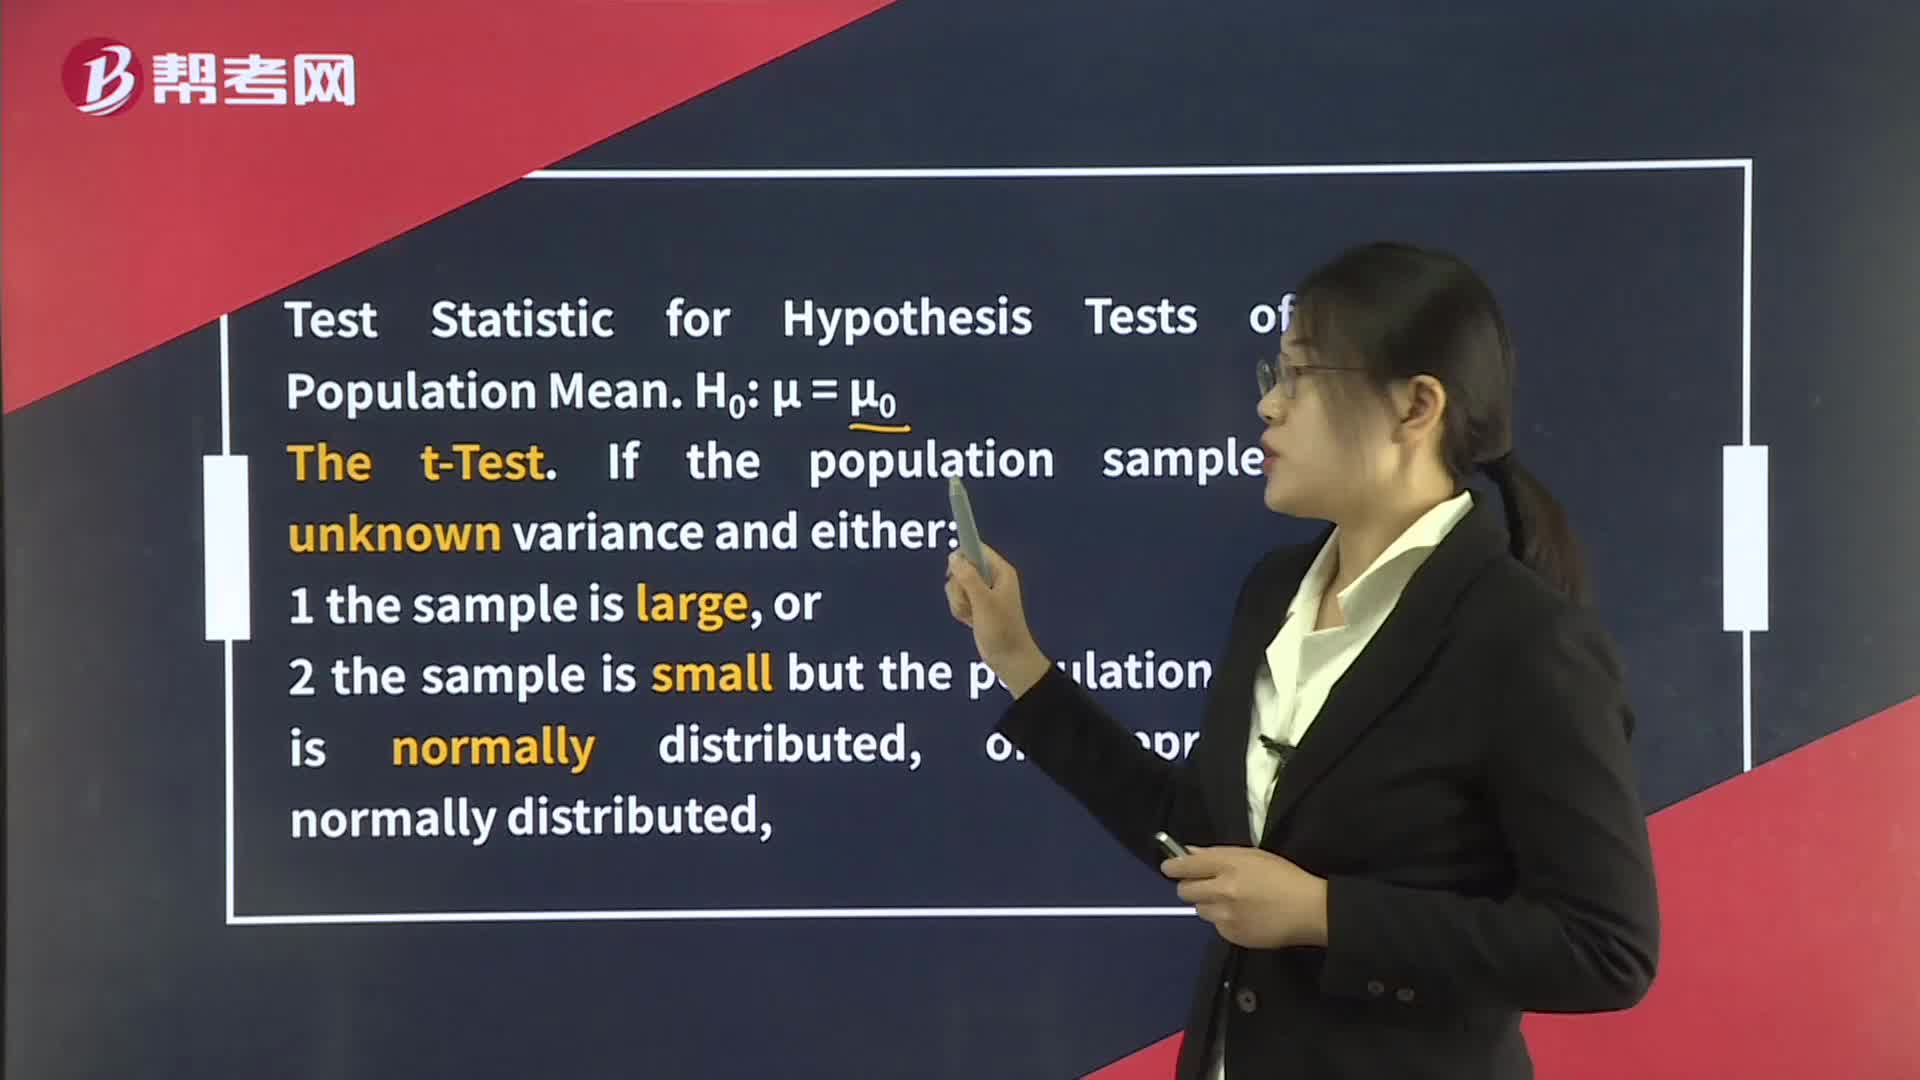 Hypothesis Tests Concerning the Mean